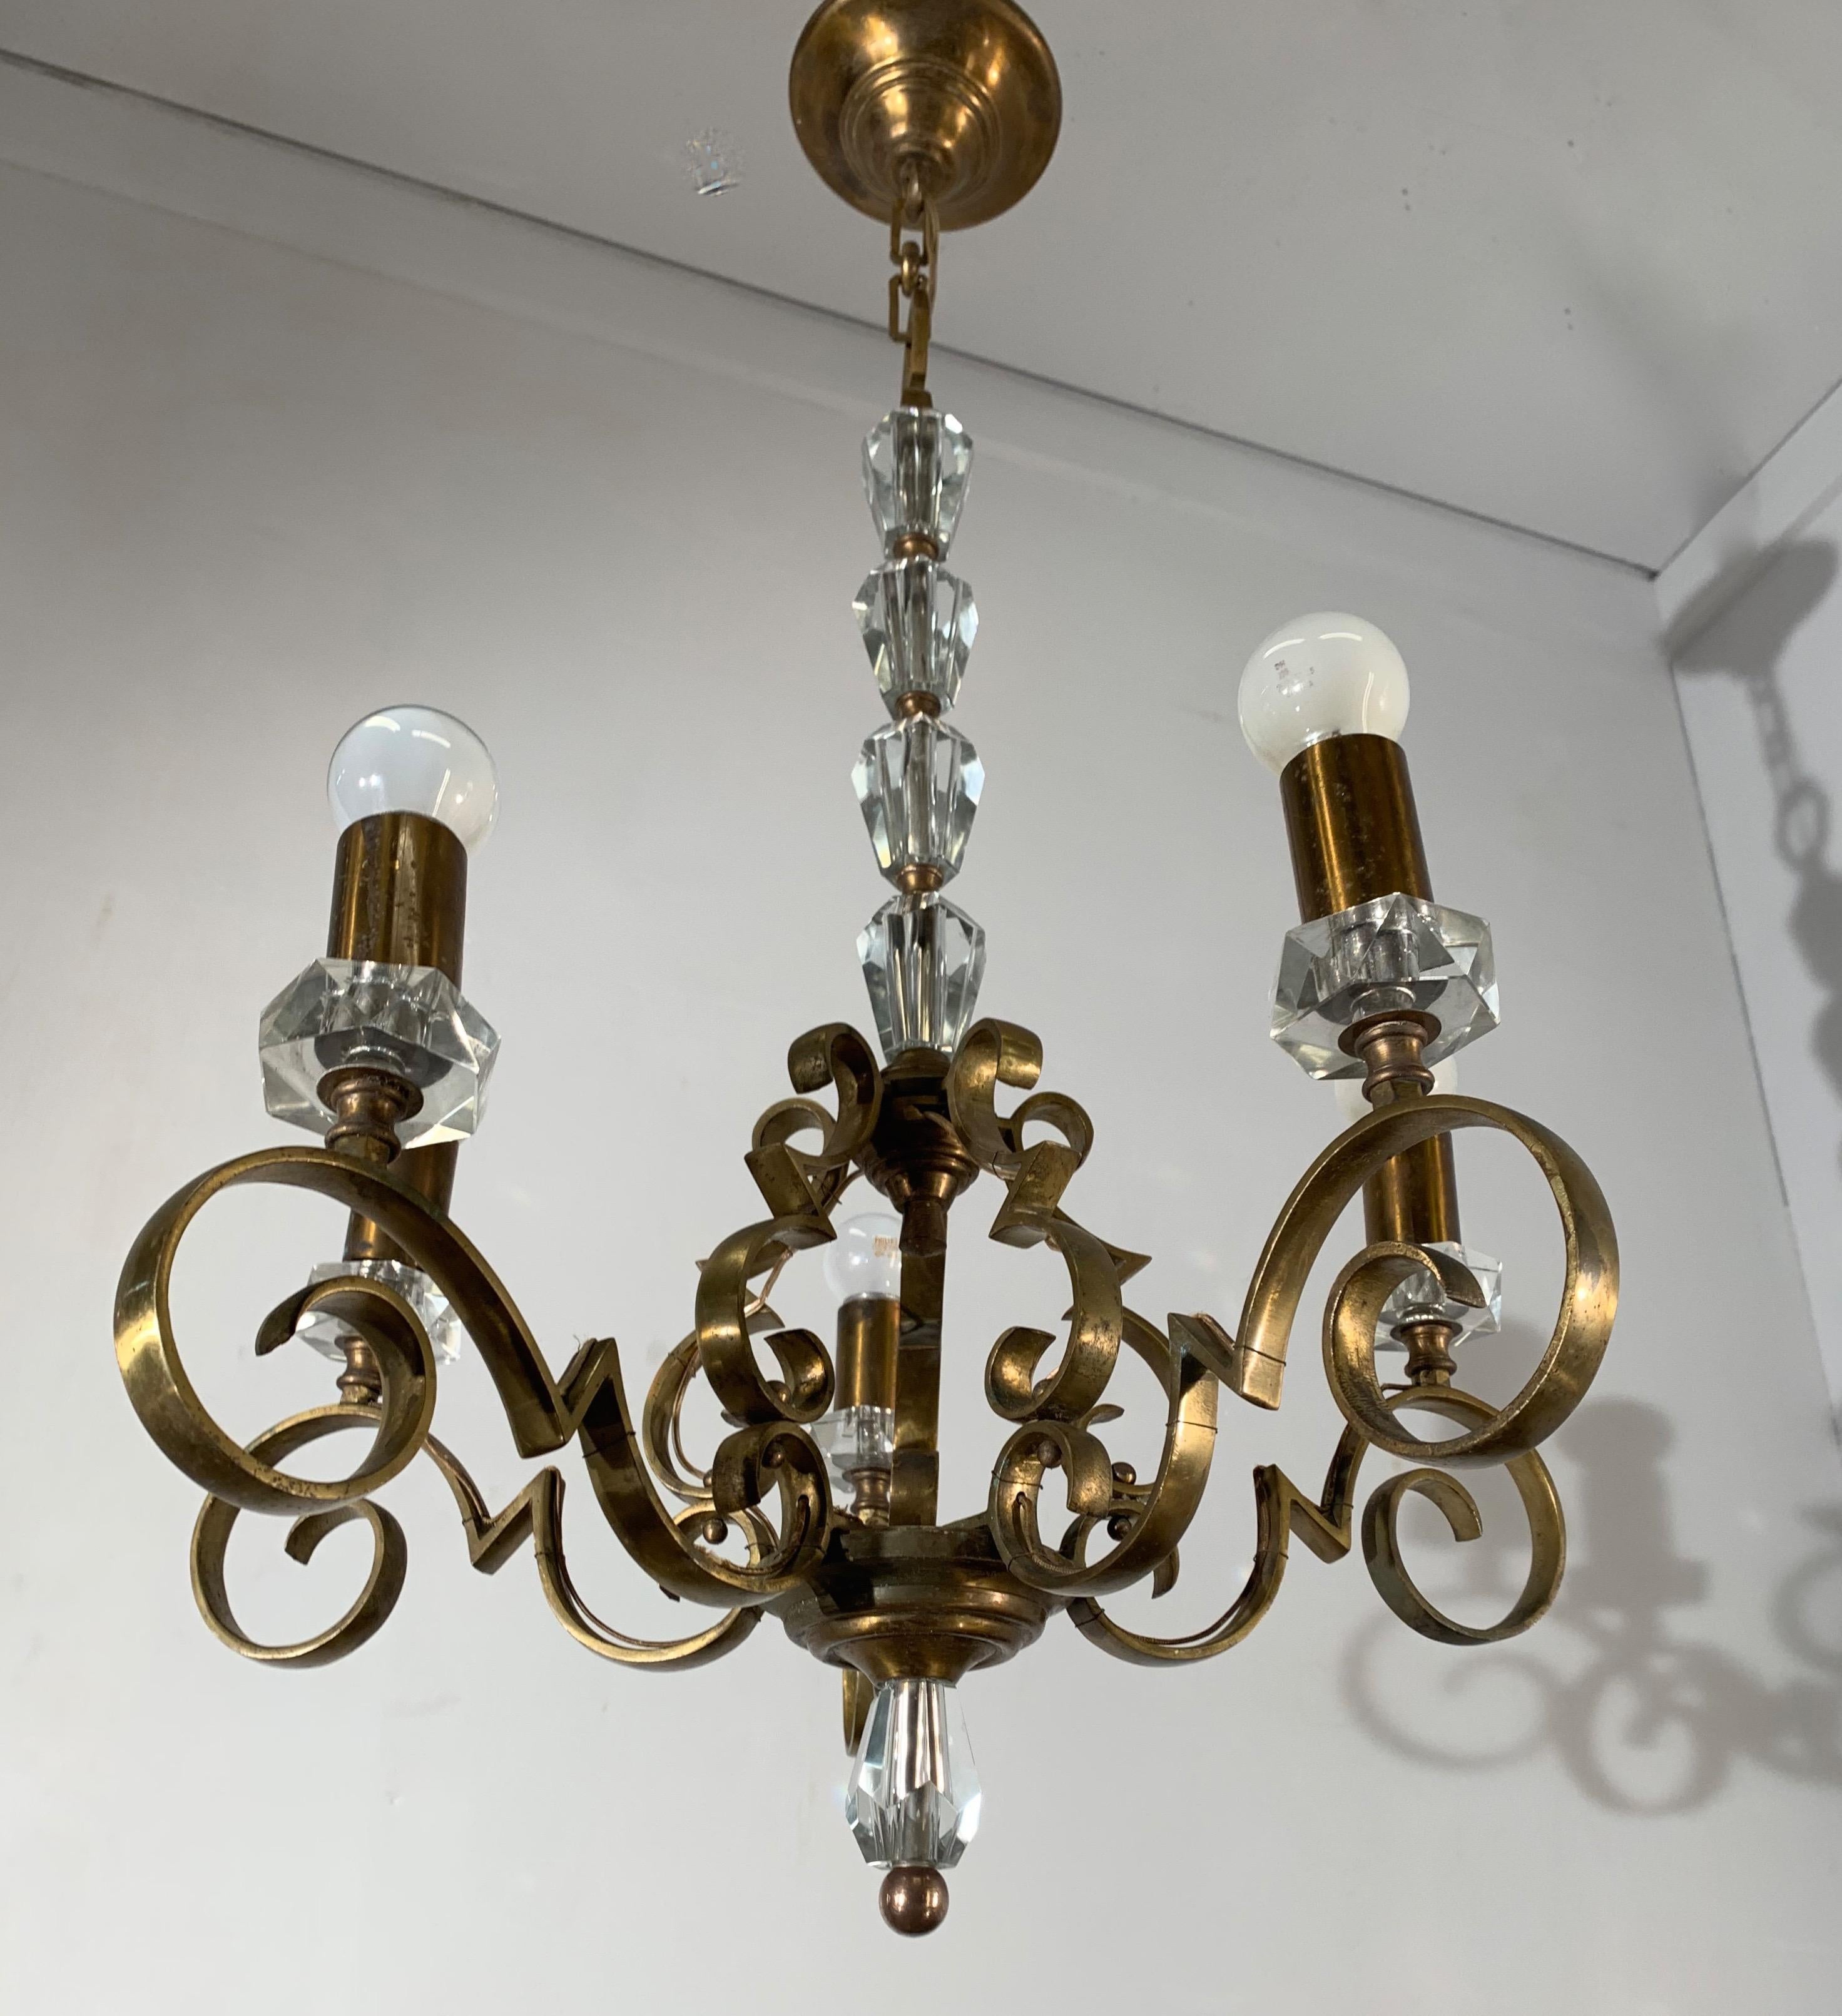 Rare and Handcrafted Jule Leleu Style 5 Light Bronze & Glass Art Deco Chandelier In Good Condition For Sale In Lisse, NL